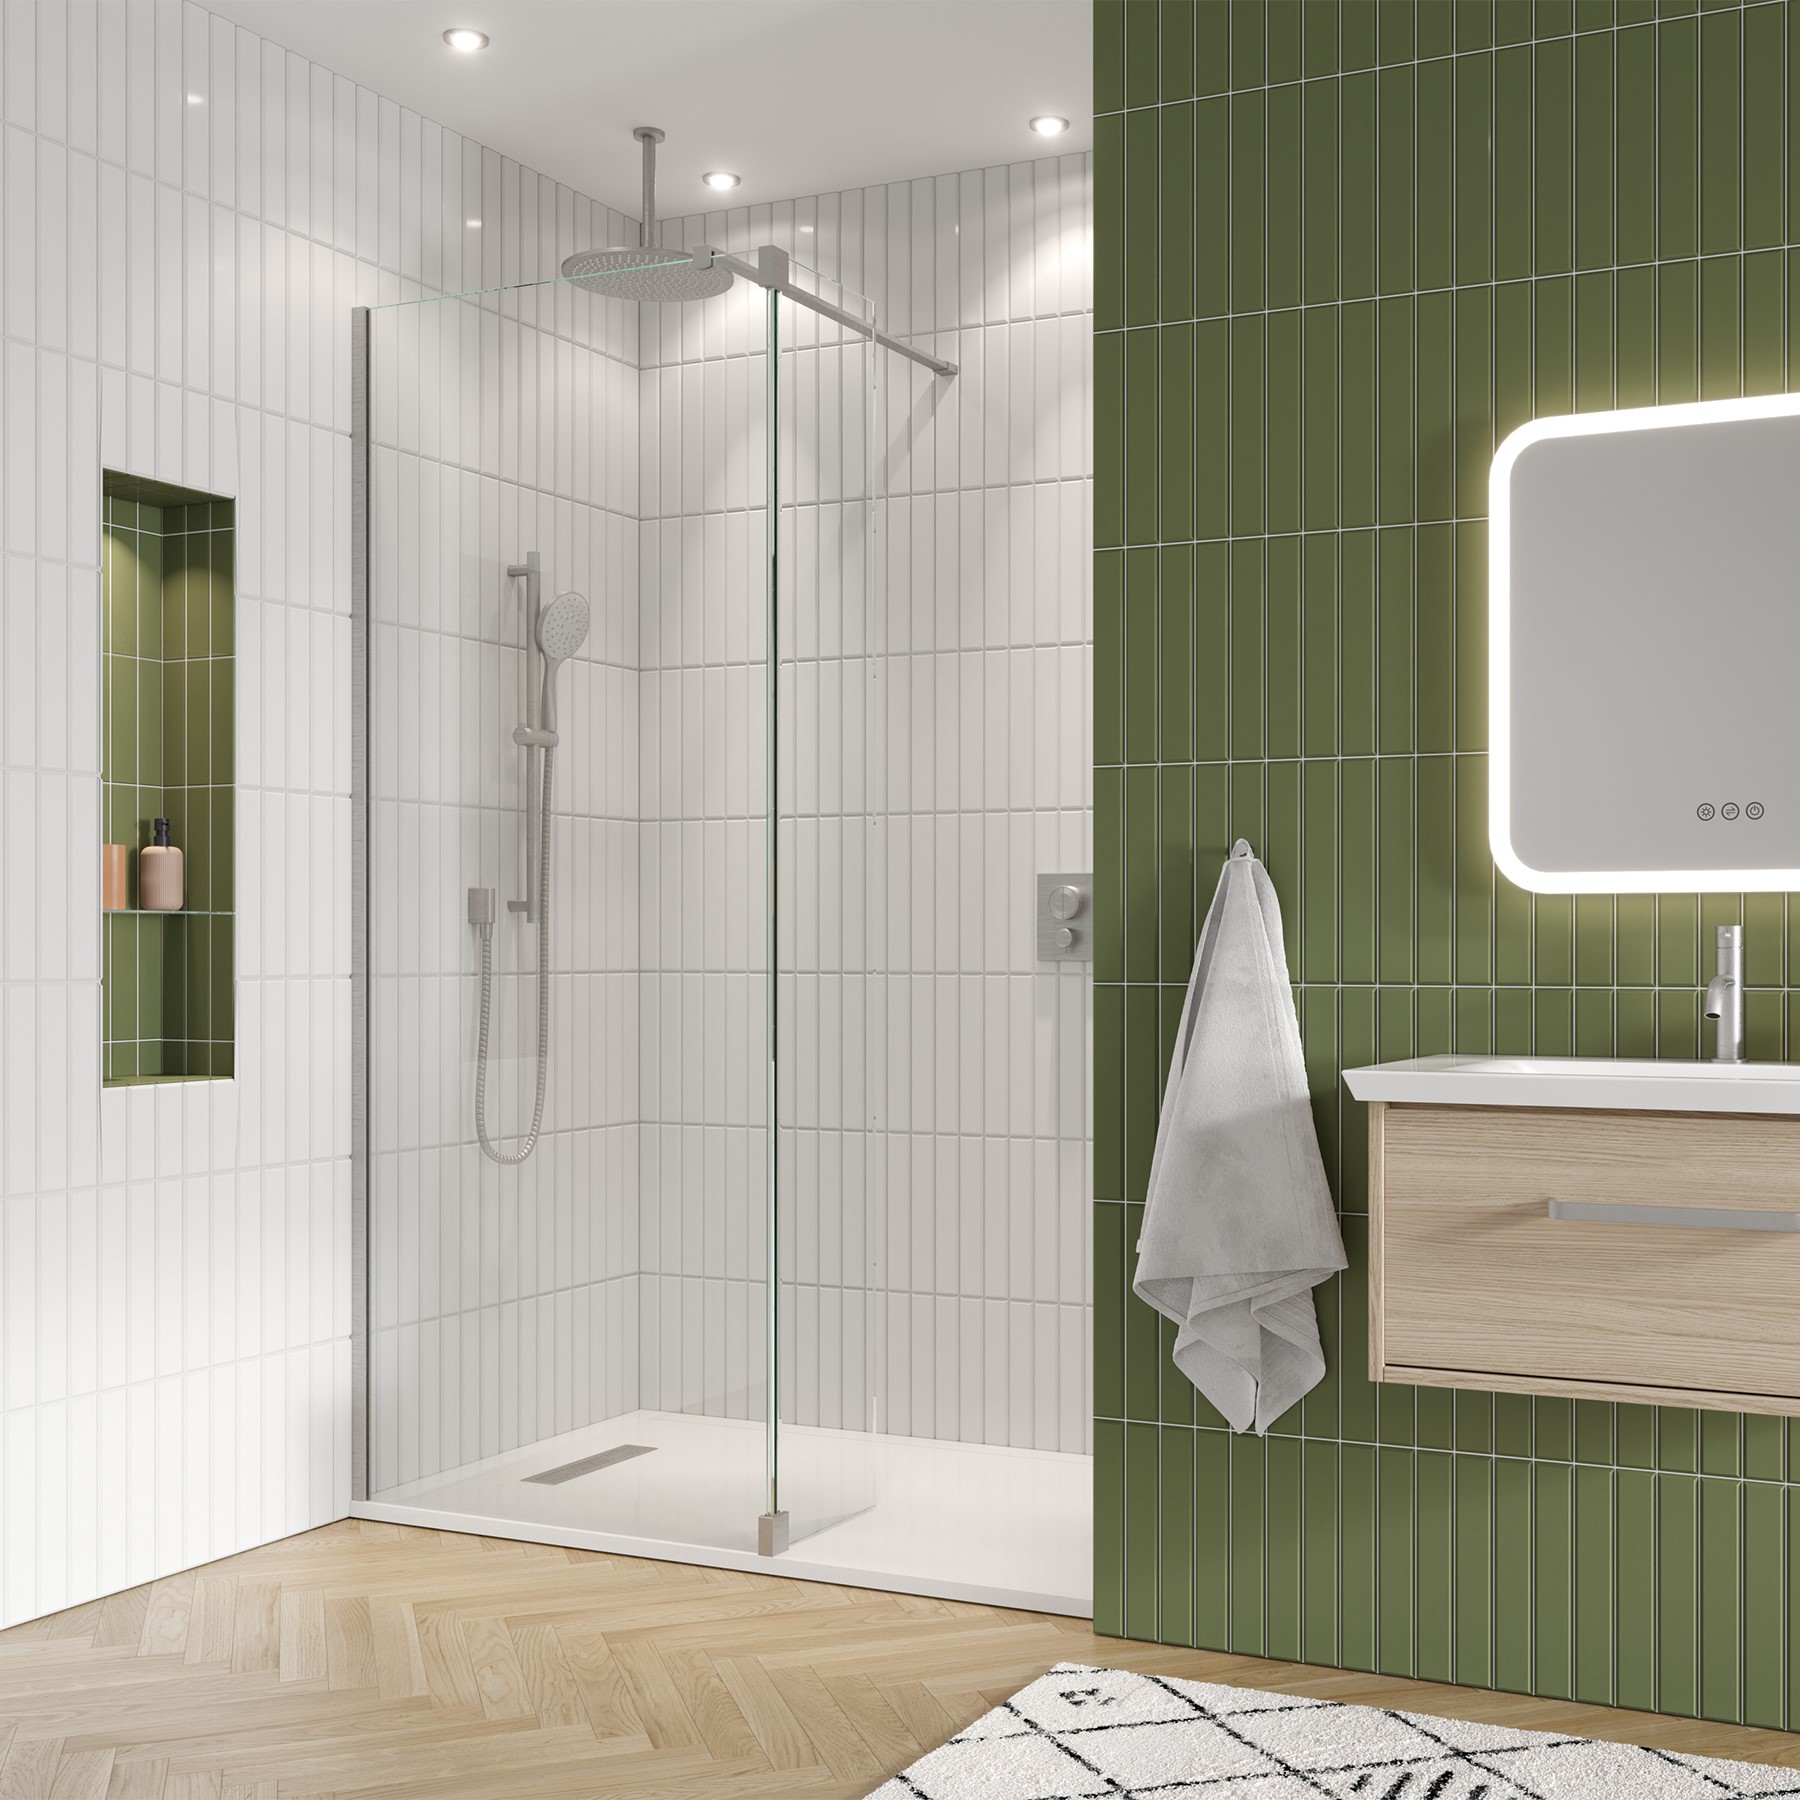 Modern shower | Discover a recess shower enclosure idea to make the most of your space